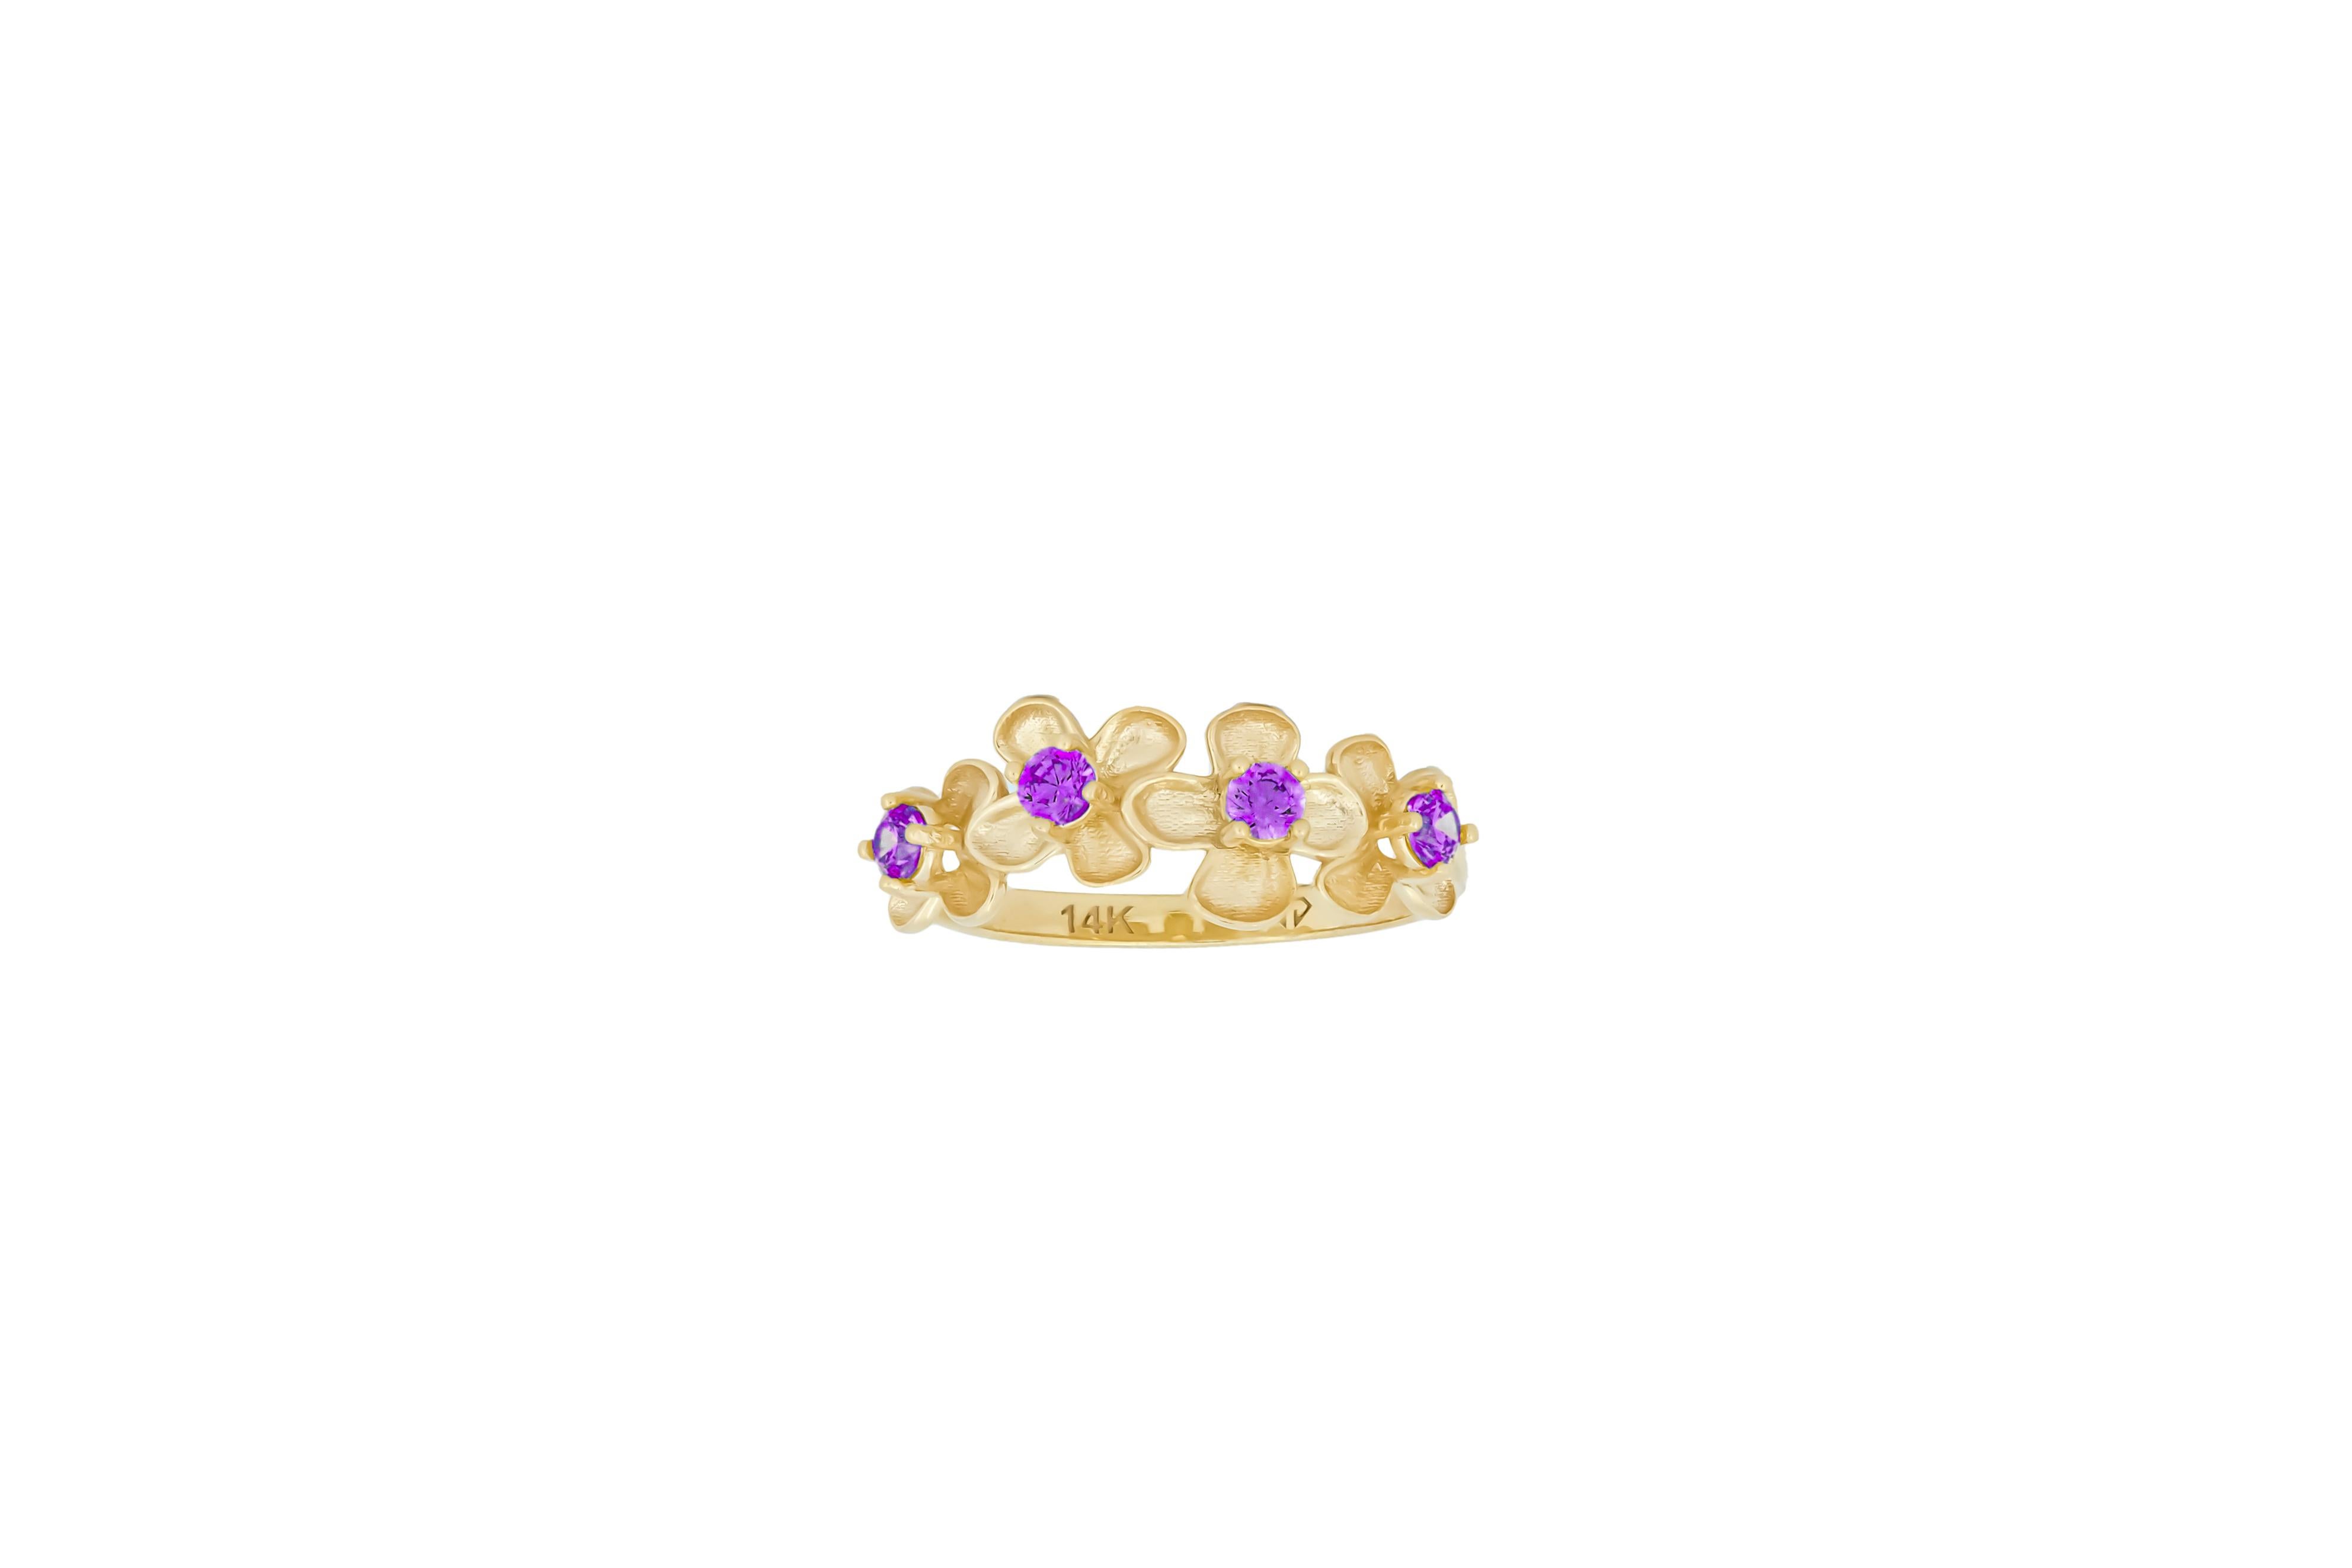 Flower 14k gold ring
Lab Amethyst 14k gold ring. Daisy flower gold ring. Flower bouquet ring. Purple gemstone ring.

Metal: 14k solid gold
Weight: 2 gr depends from size

Gemstones:
Set with lab amethyst
Color - purple, 
Cut: round

In our shop you